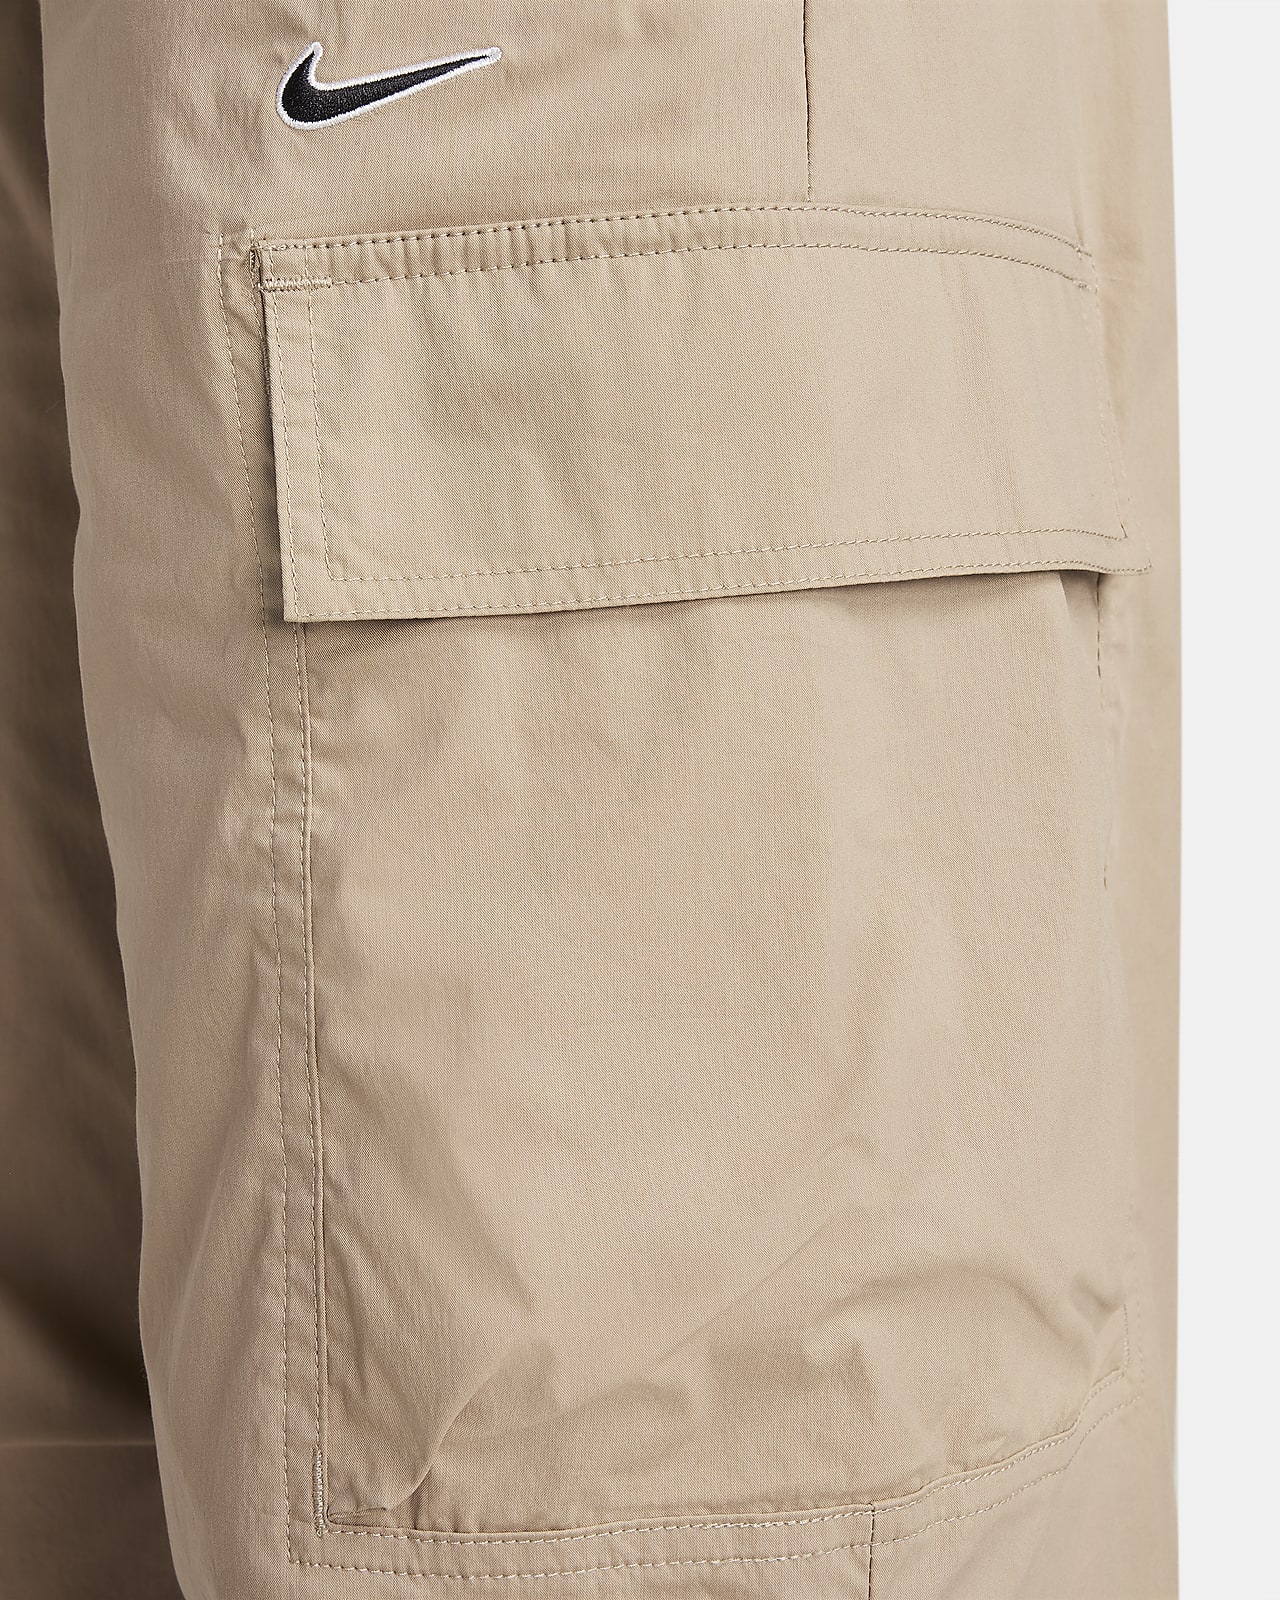 Nike Oversized High-Waisted Woven Cargo Pants Brown, Women